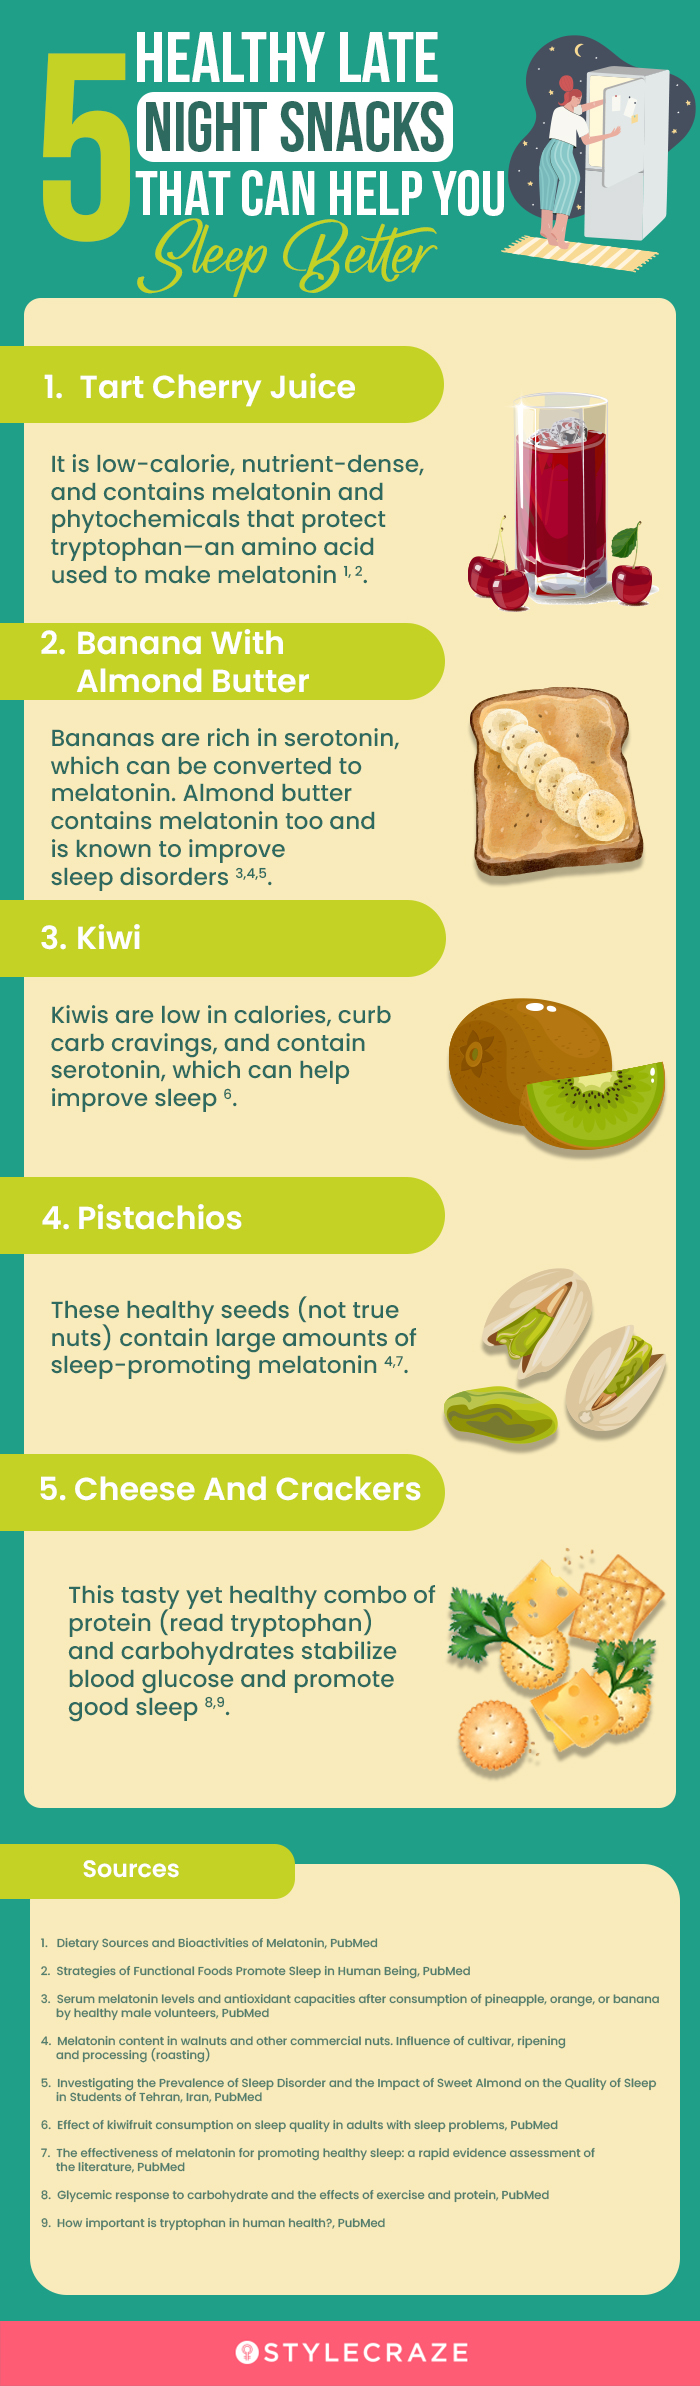 5 healthy late night snacks that can help you sleep better (infographic)